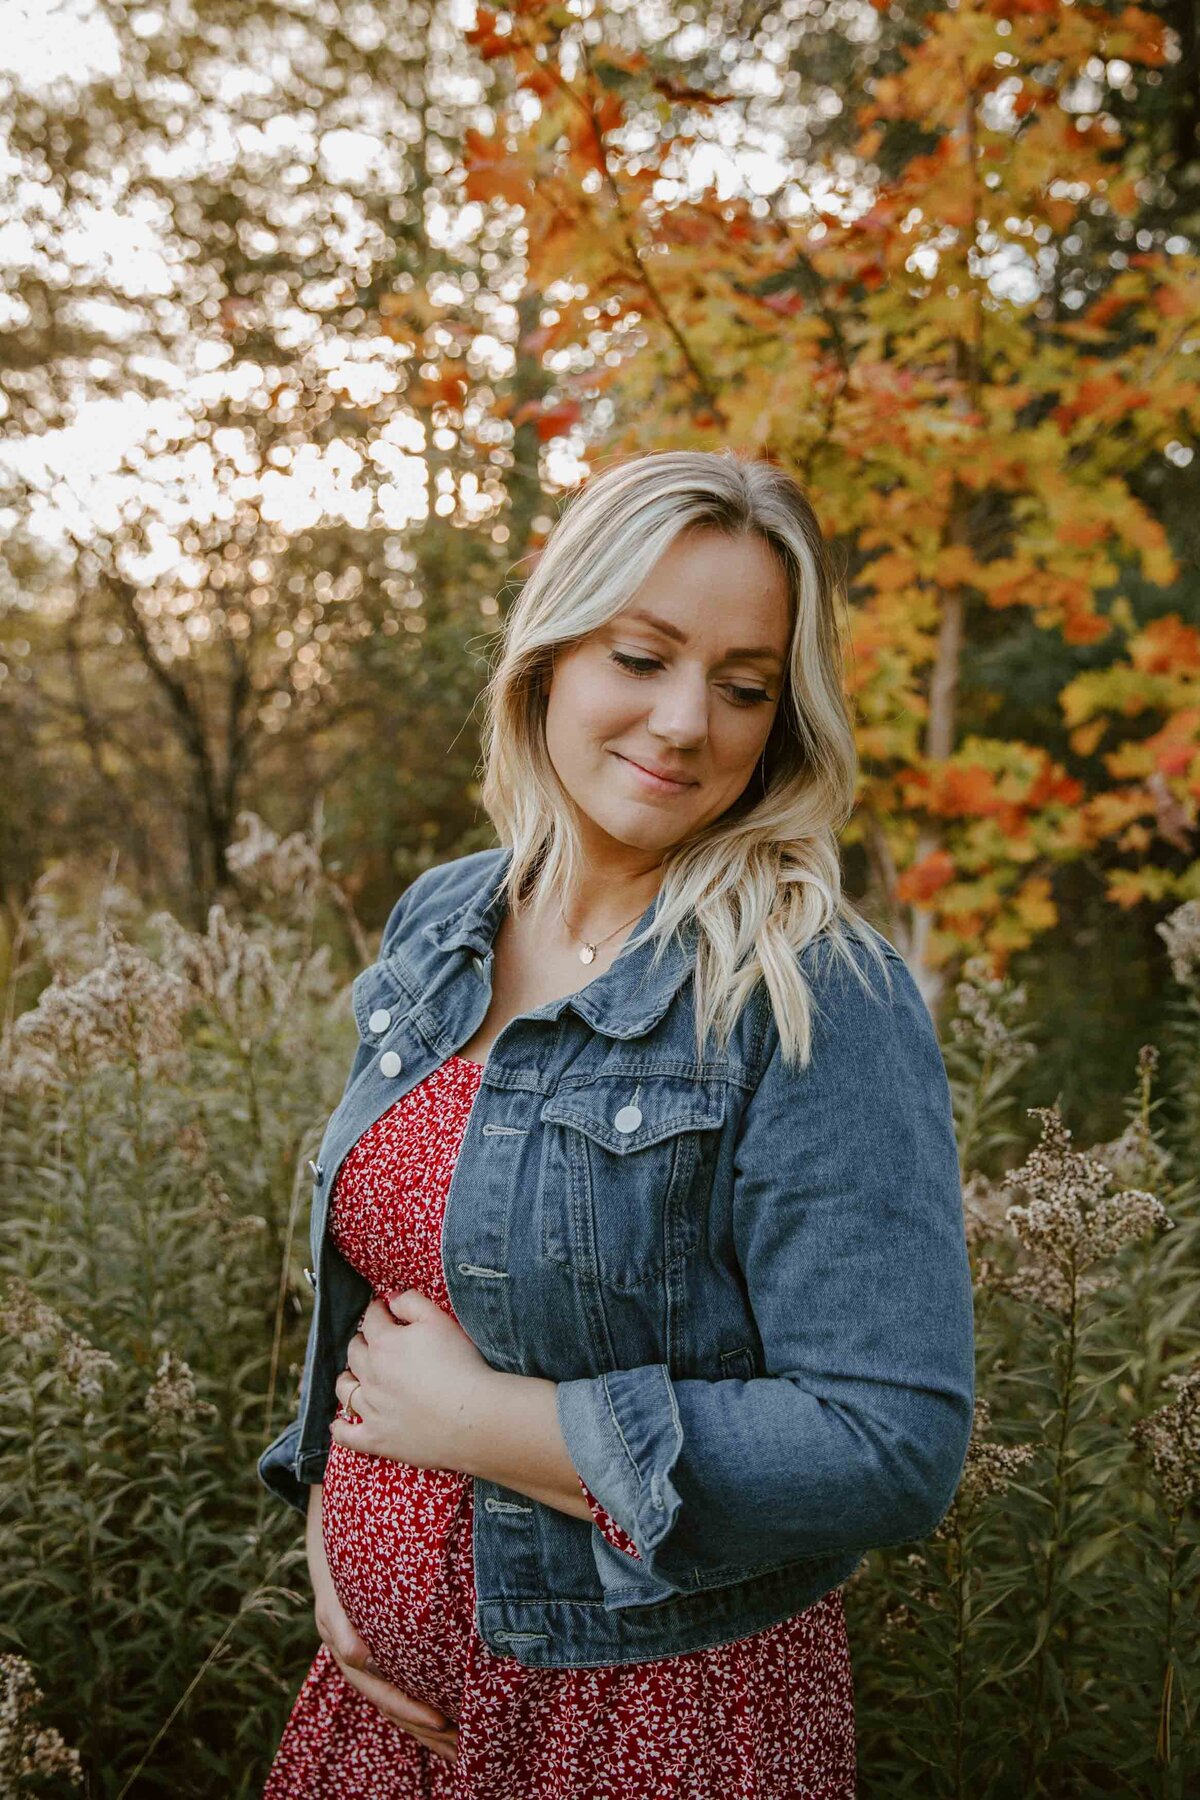 Expectant mom in outdoor maternity photo session in London, Ontario. Mom is waring a red patterned dress with denim jacket holding her baby bump and looking down over her shoulder.